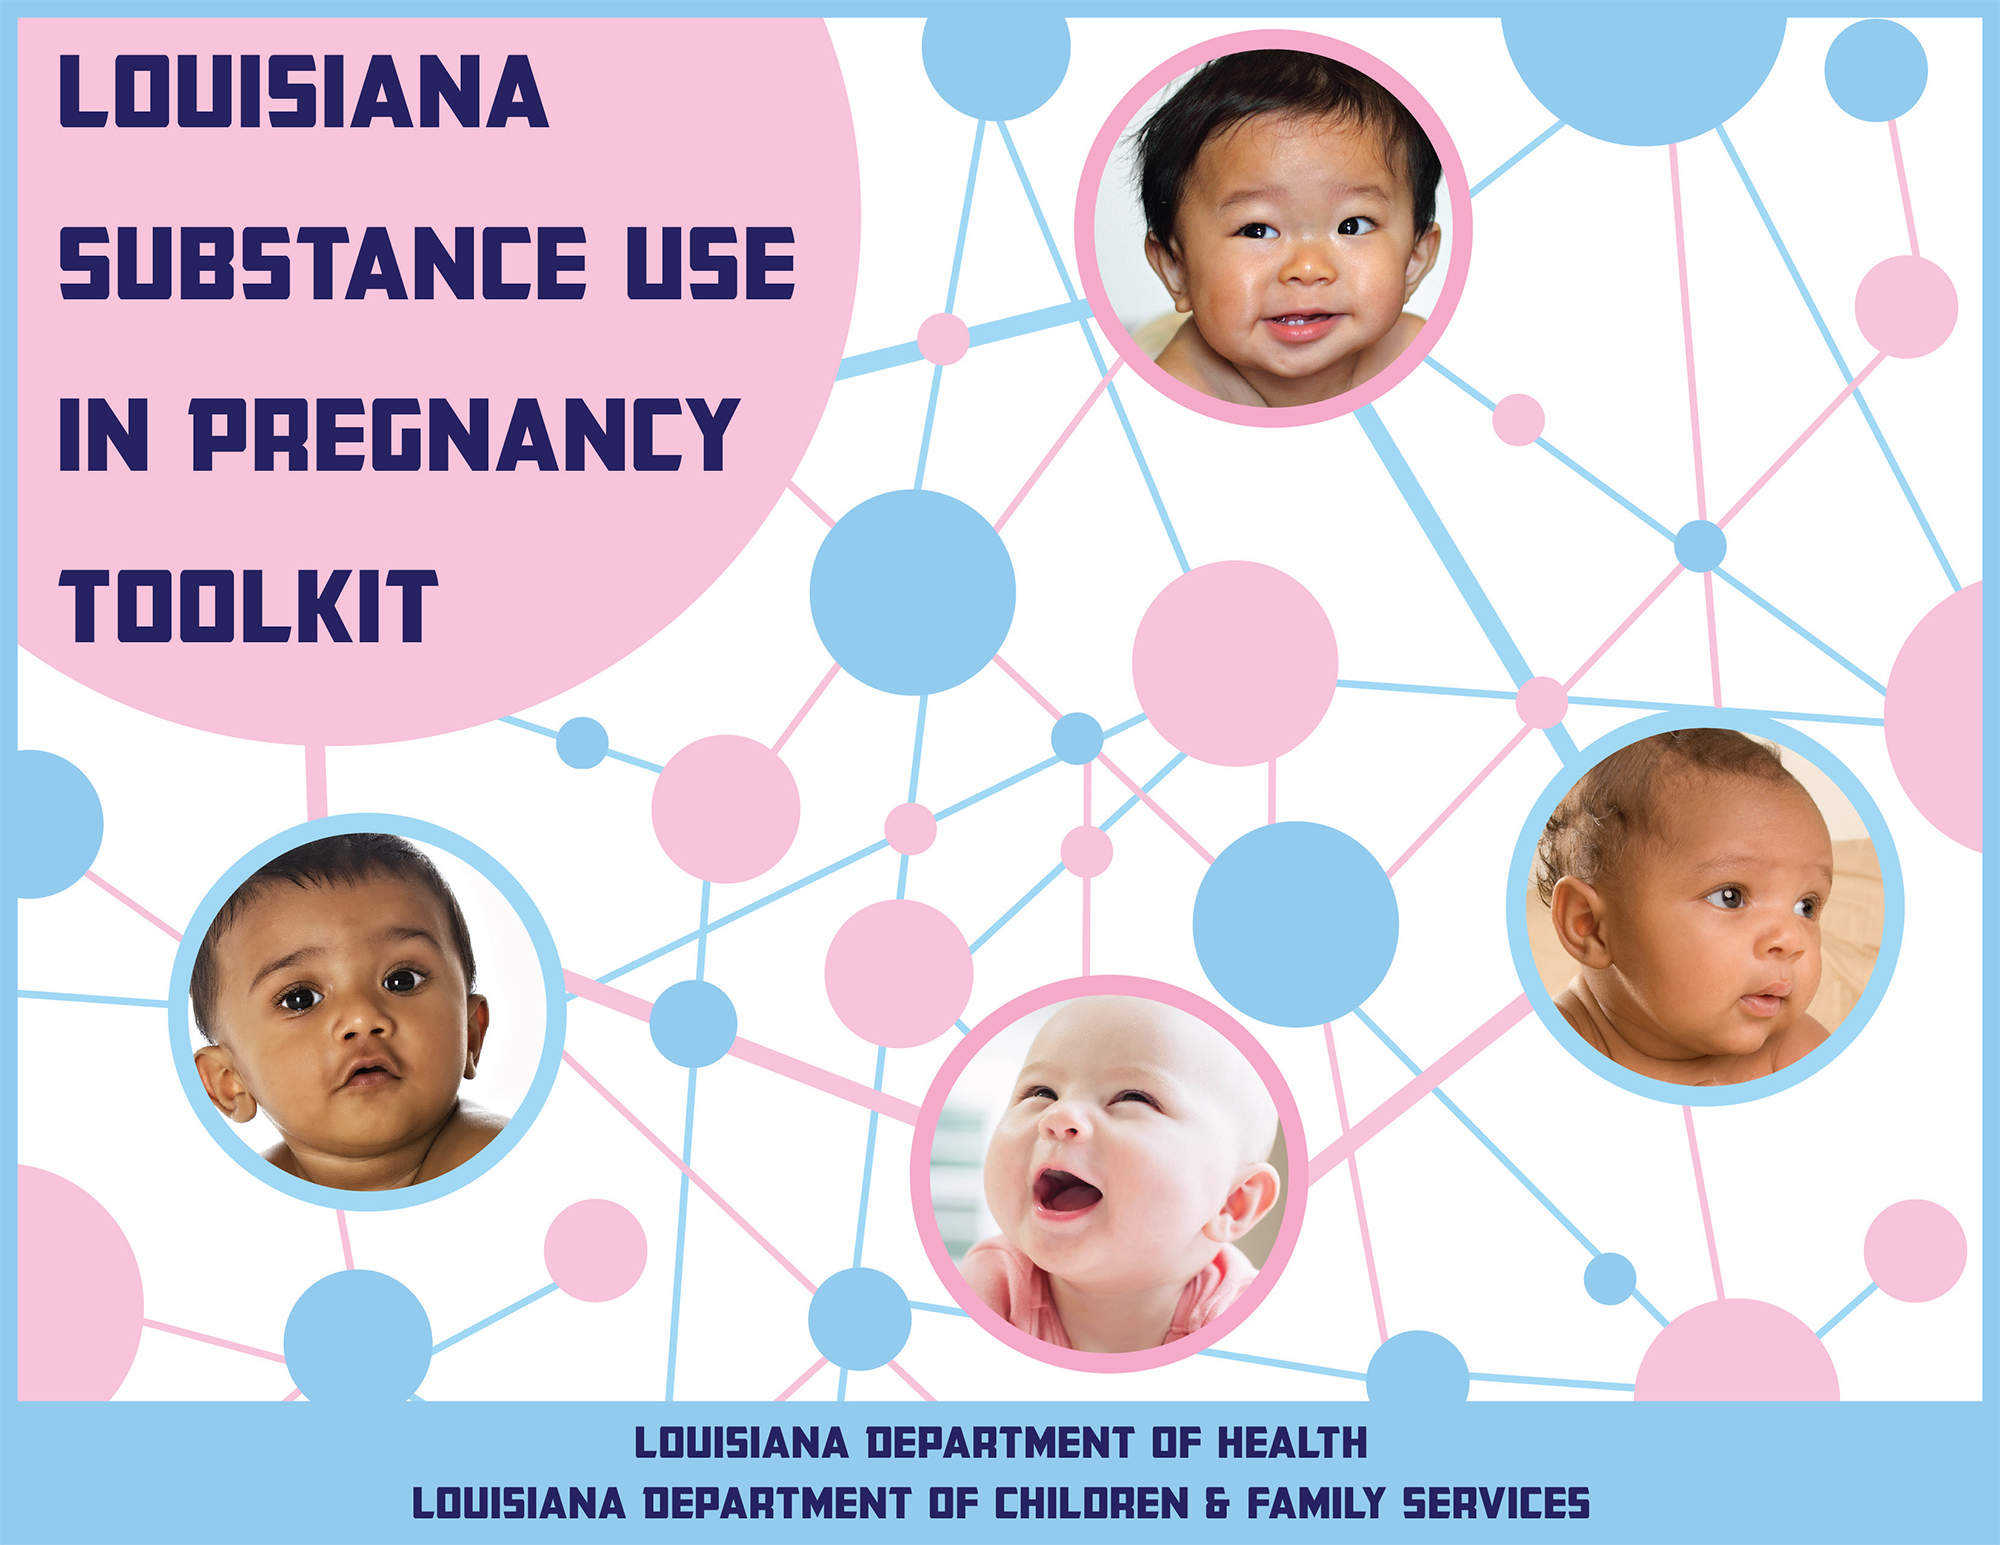 Louisiana Substance Use in Pregnancy Toolkit - cover page